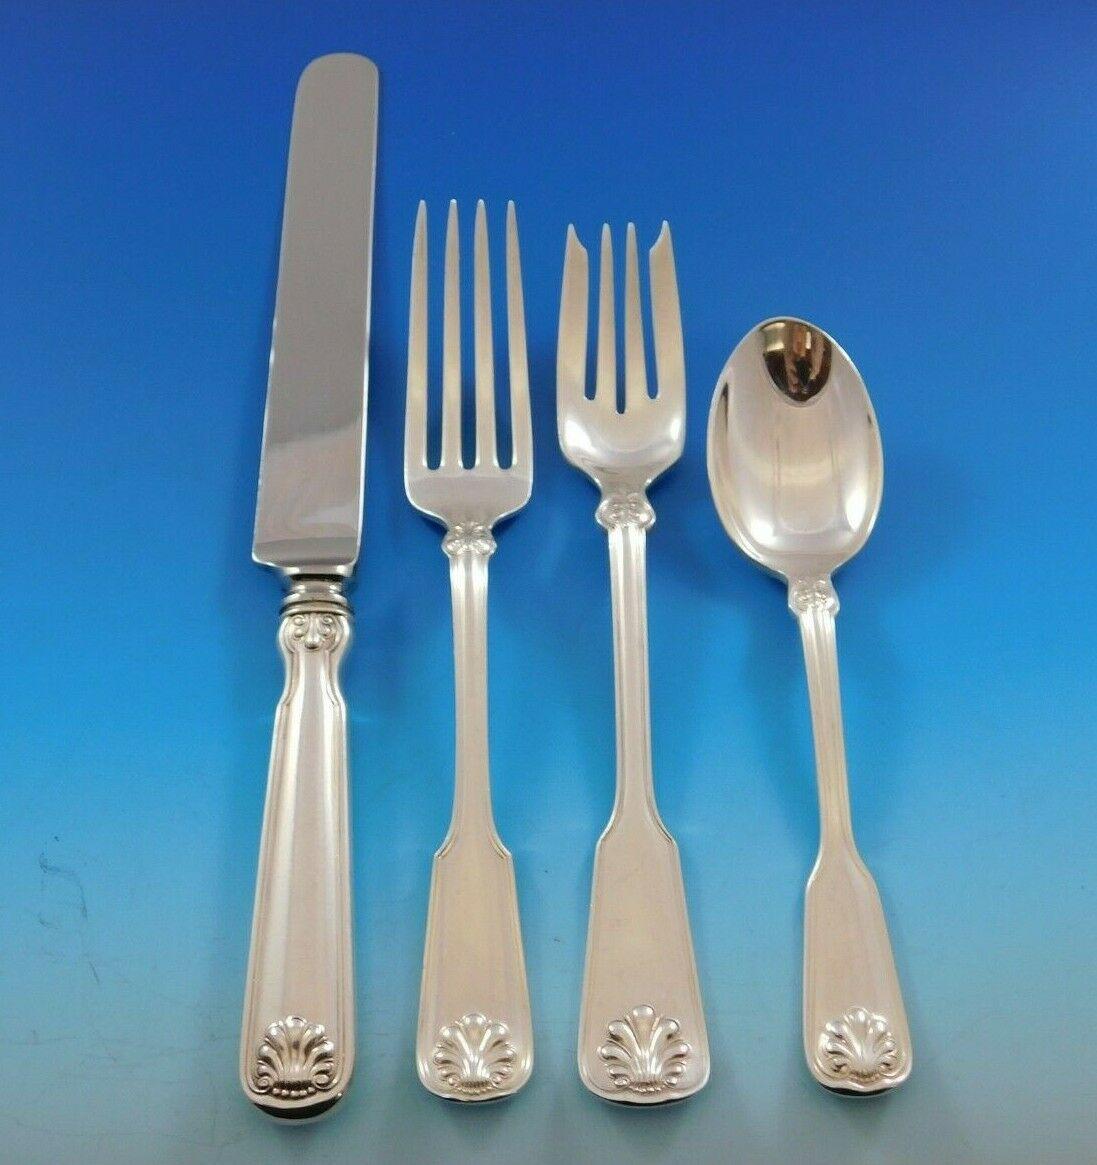 20th Century Shell and Thread by Tiffany Sterling Silver Flatware Set 12 Service 136pc Dinner